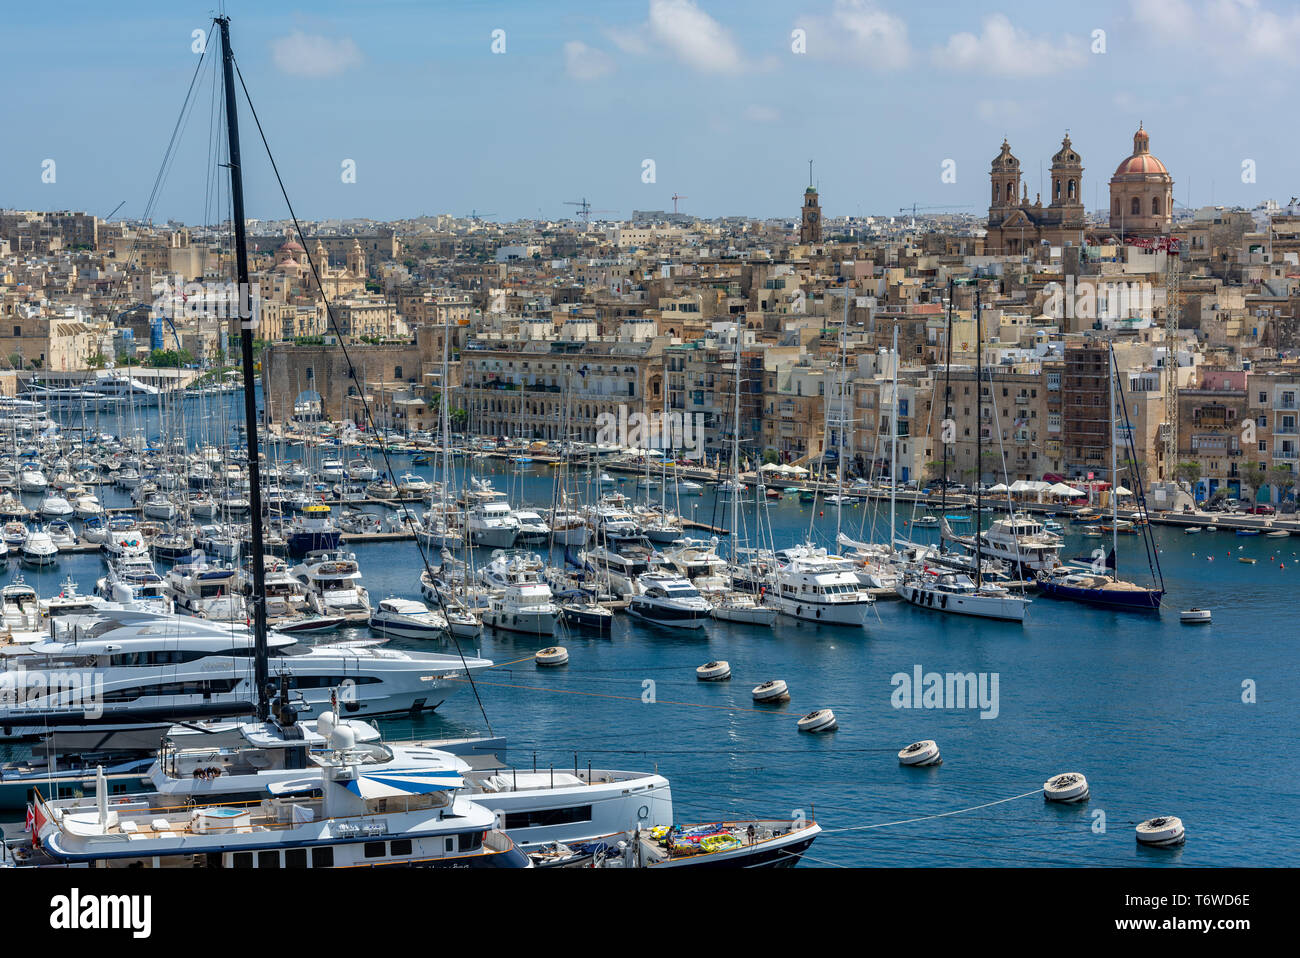 Luxury yachts and pleasure craft moored in Dockyard Creek of Valletta's Grand Harbour overlook by the Basilica of the Nativity of Mary, Senglea Stock Photo